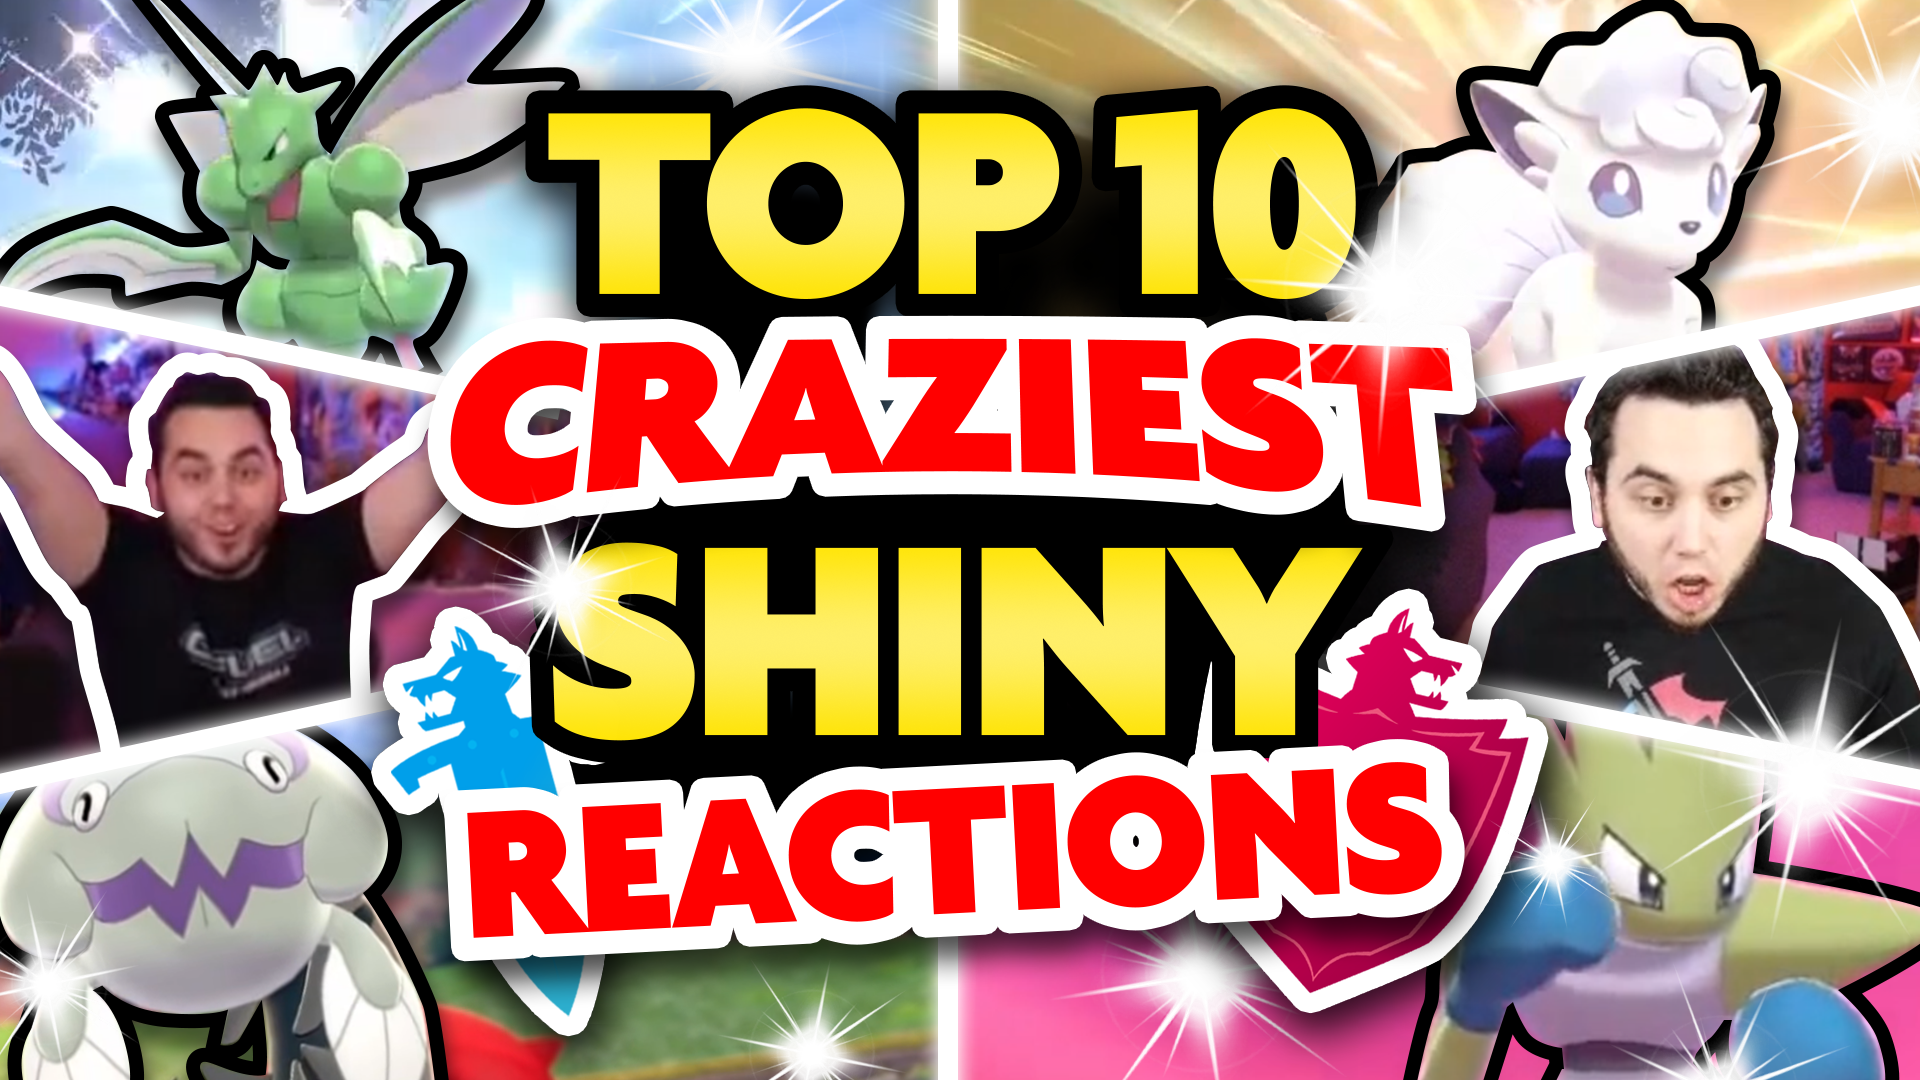 Adrive Teamshiny It Is That Time The Top 10 Best Shiny Reactions From Adrive In Pokemon Sword And Shield Our Best Shiny Moments Over The Last 8 Months T Co Wkplllxppt Rt